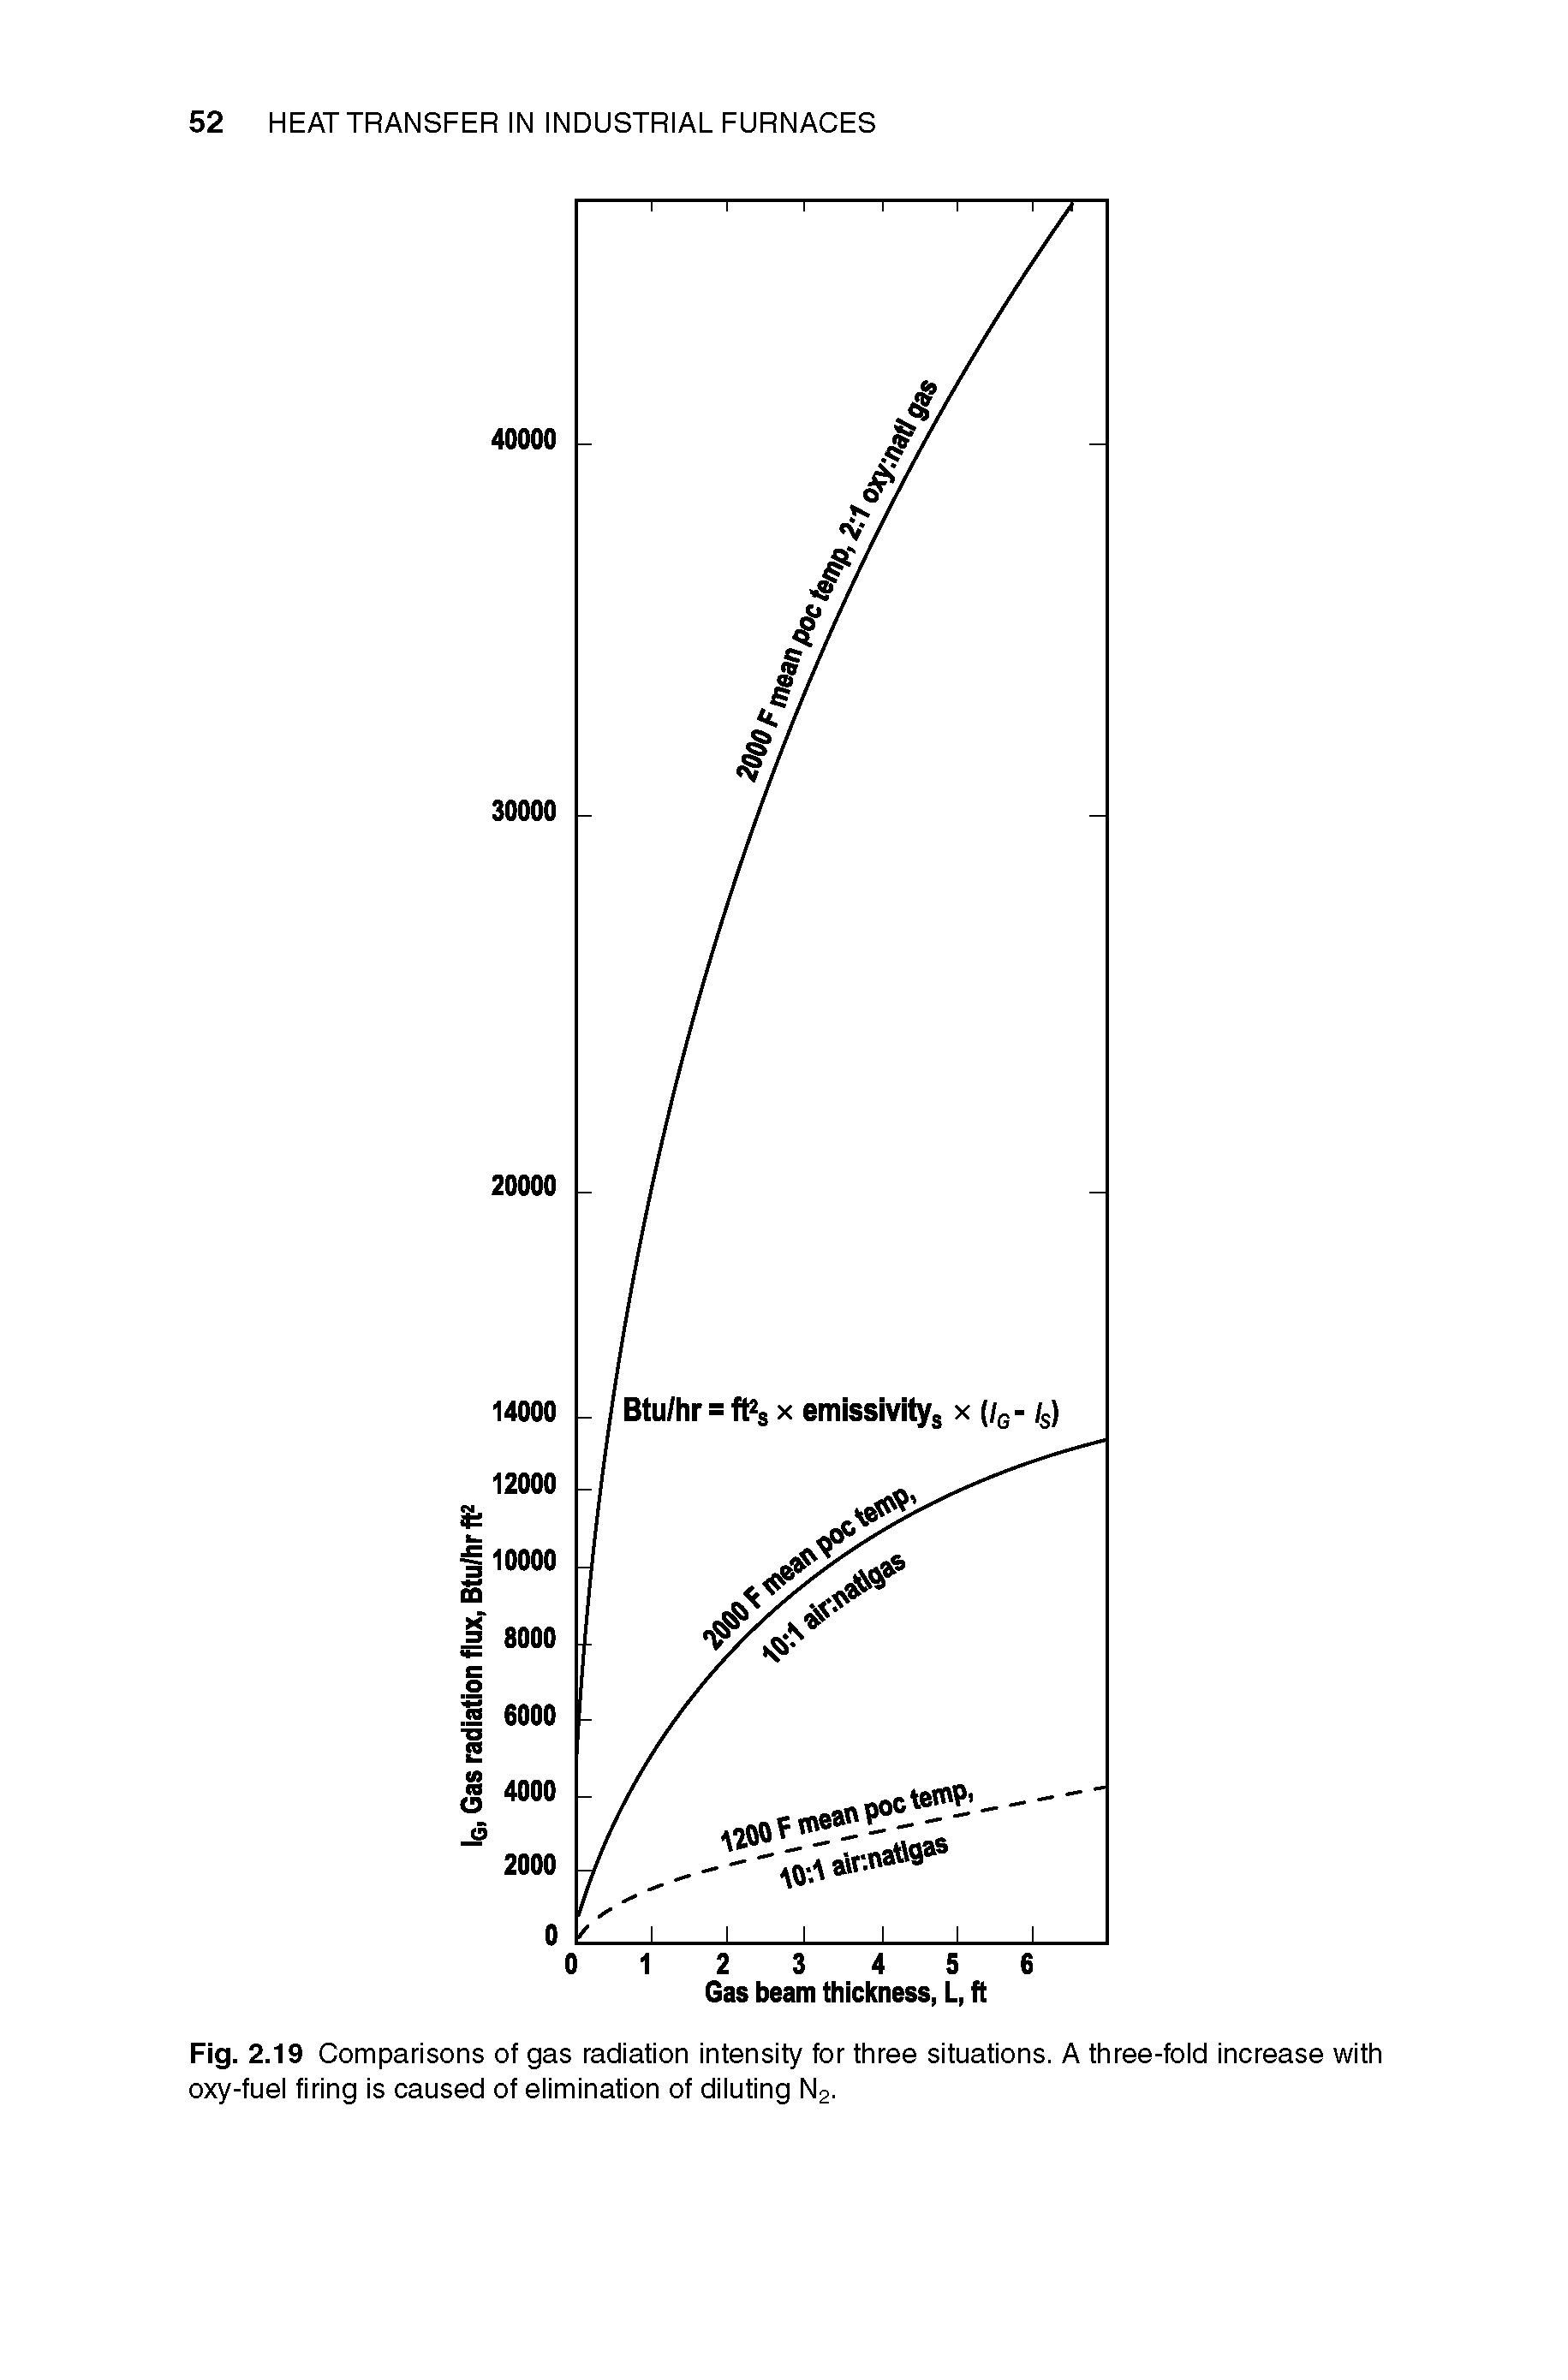 Fig. 2.19 Comparisons of gas radiation Intensity for three situations. A three-fold Increase with oxy-fuel firing Is caused of elimination of diluting N2.